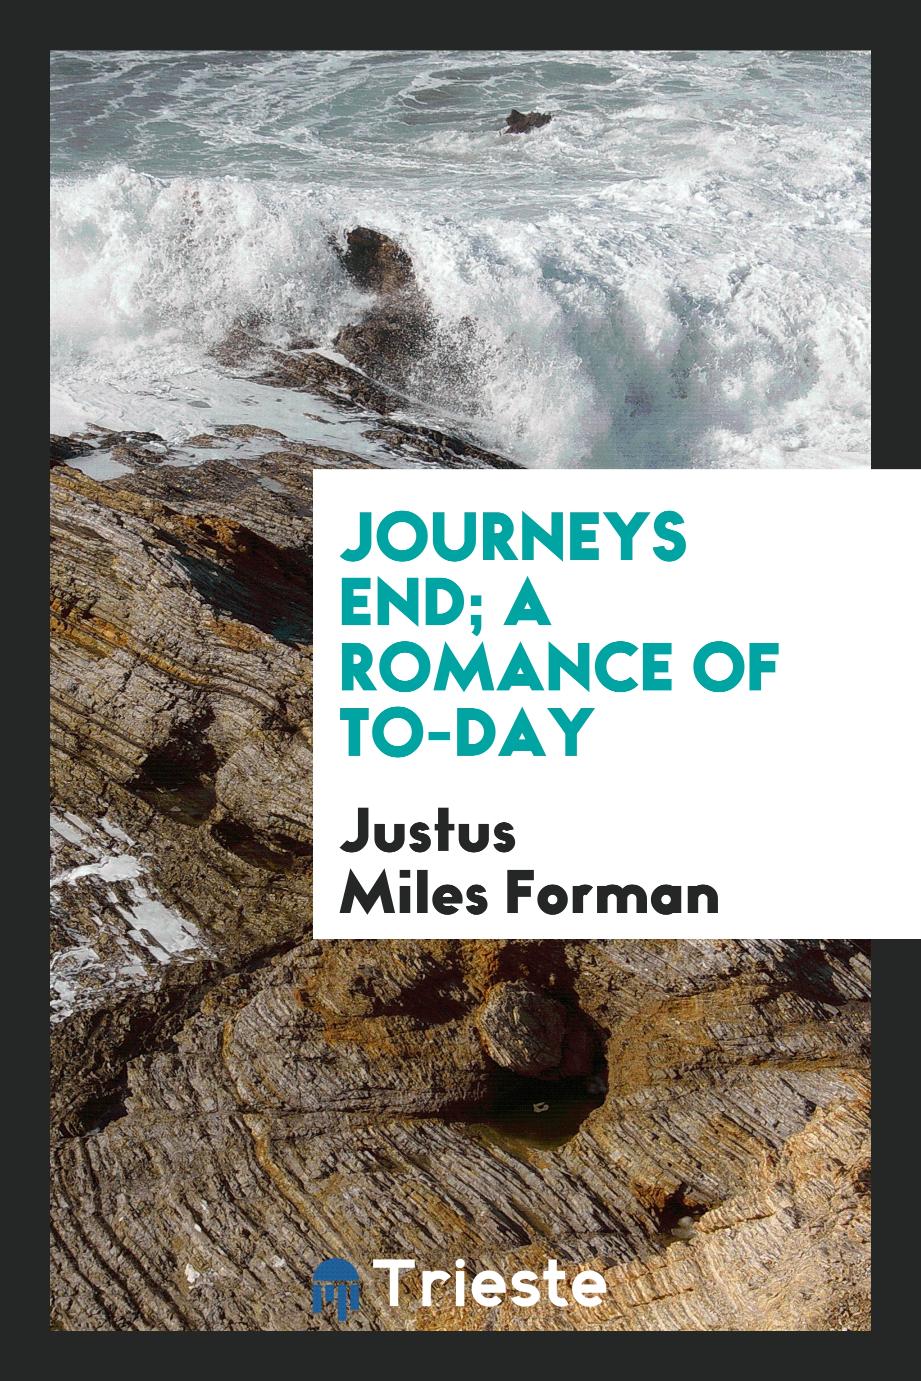 Journeys end; a romance of to-day